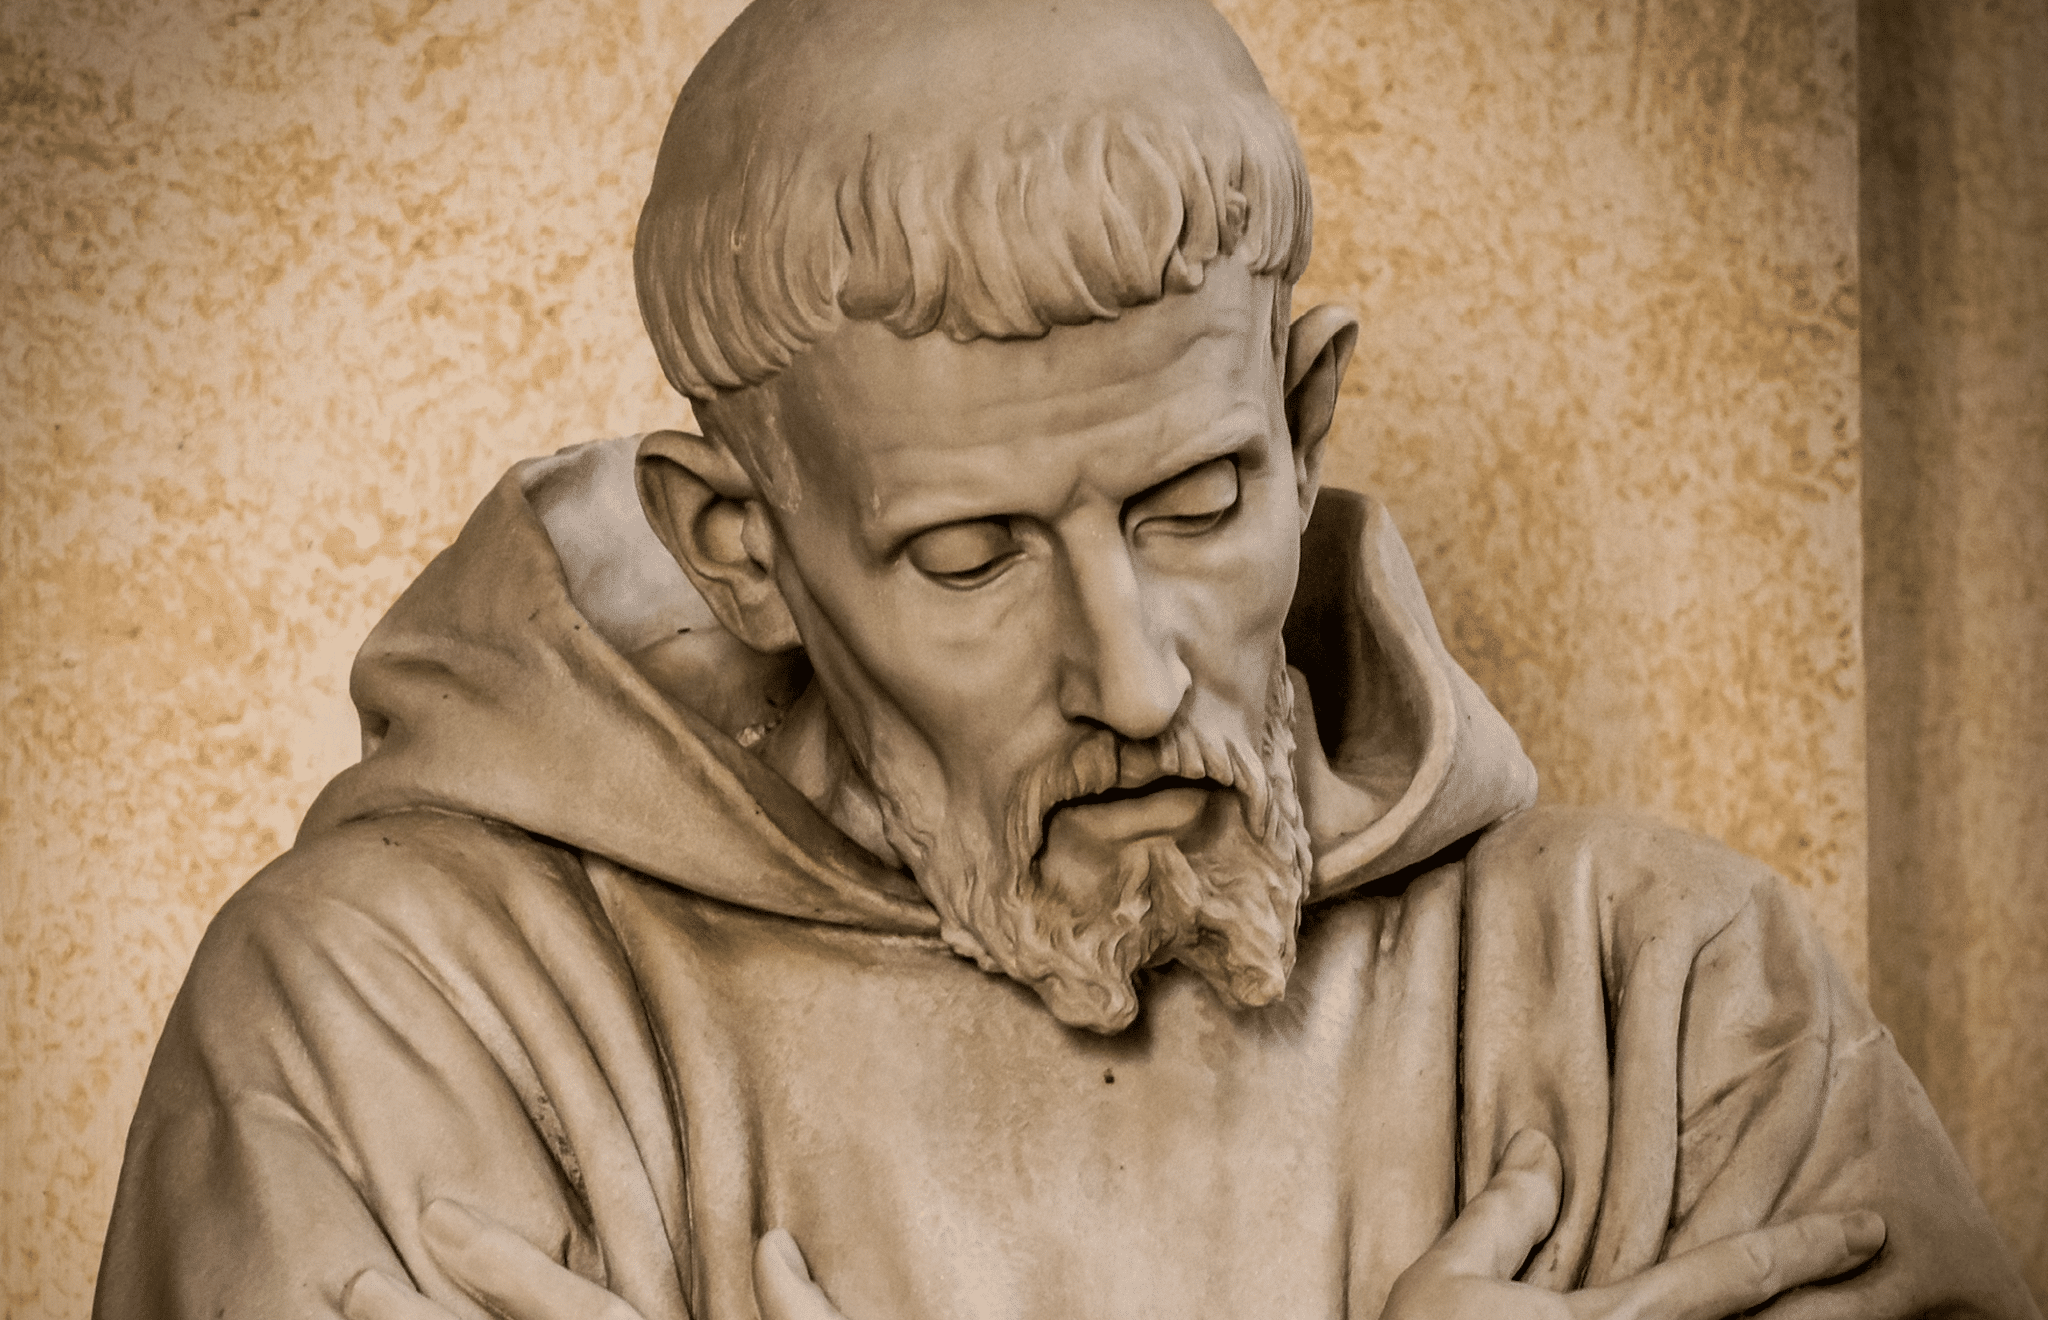 Statue of St. Francis | Image by Robert Cheaib from Pixabay